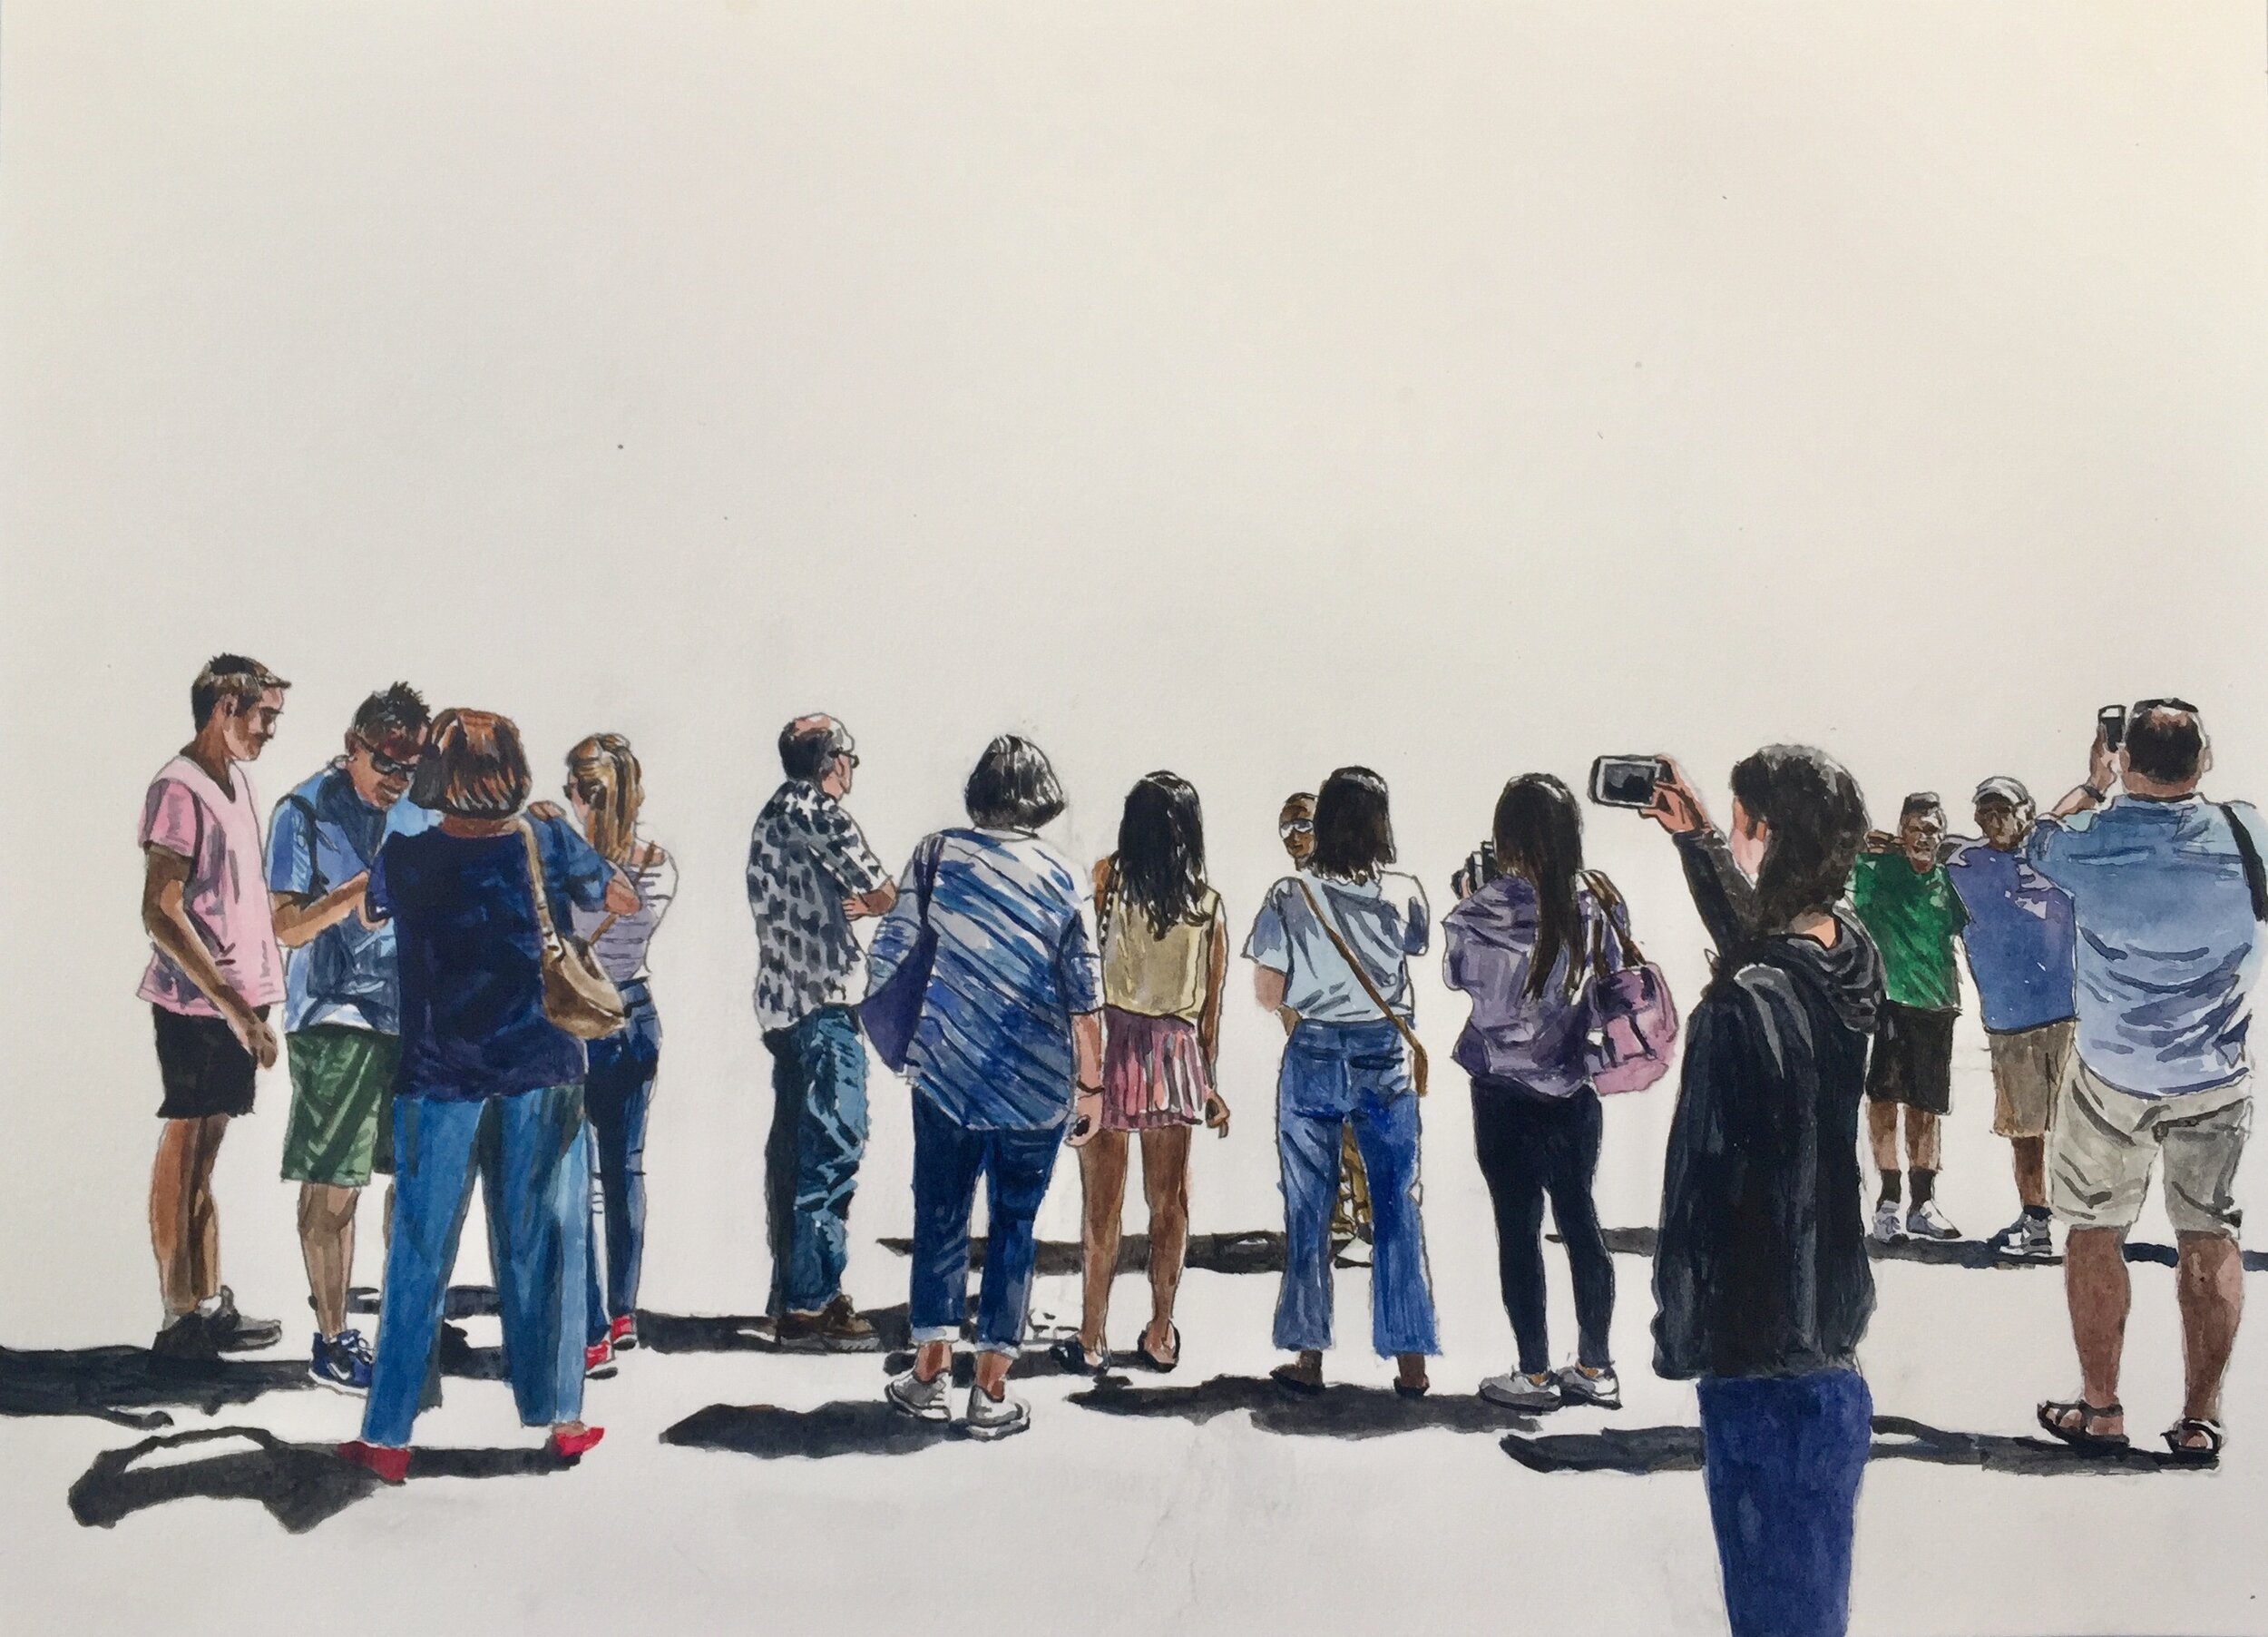 Vista Crowd, 2019, 11 x 15 inches, acrylic on paper